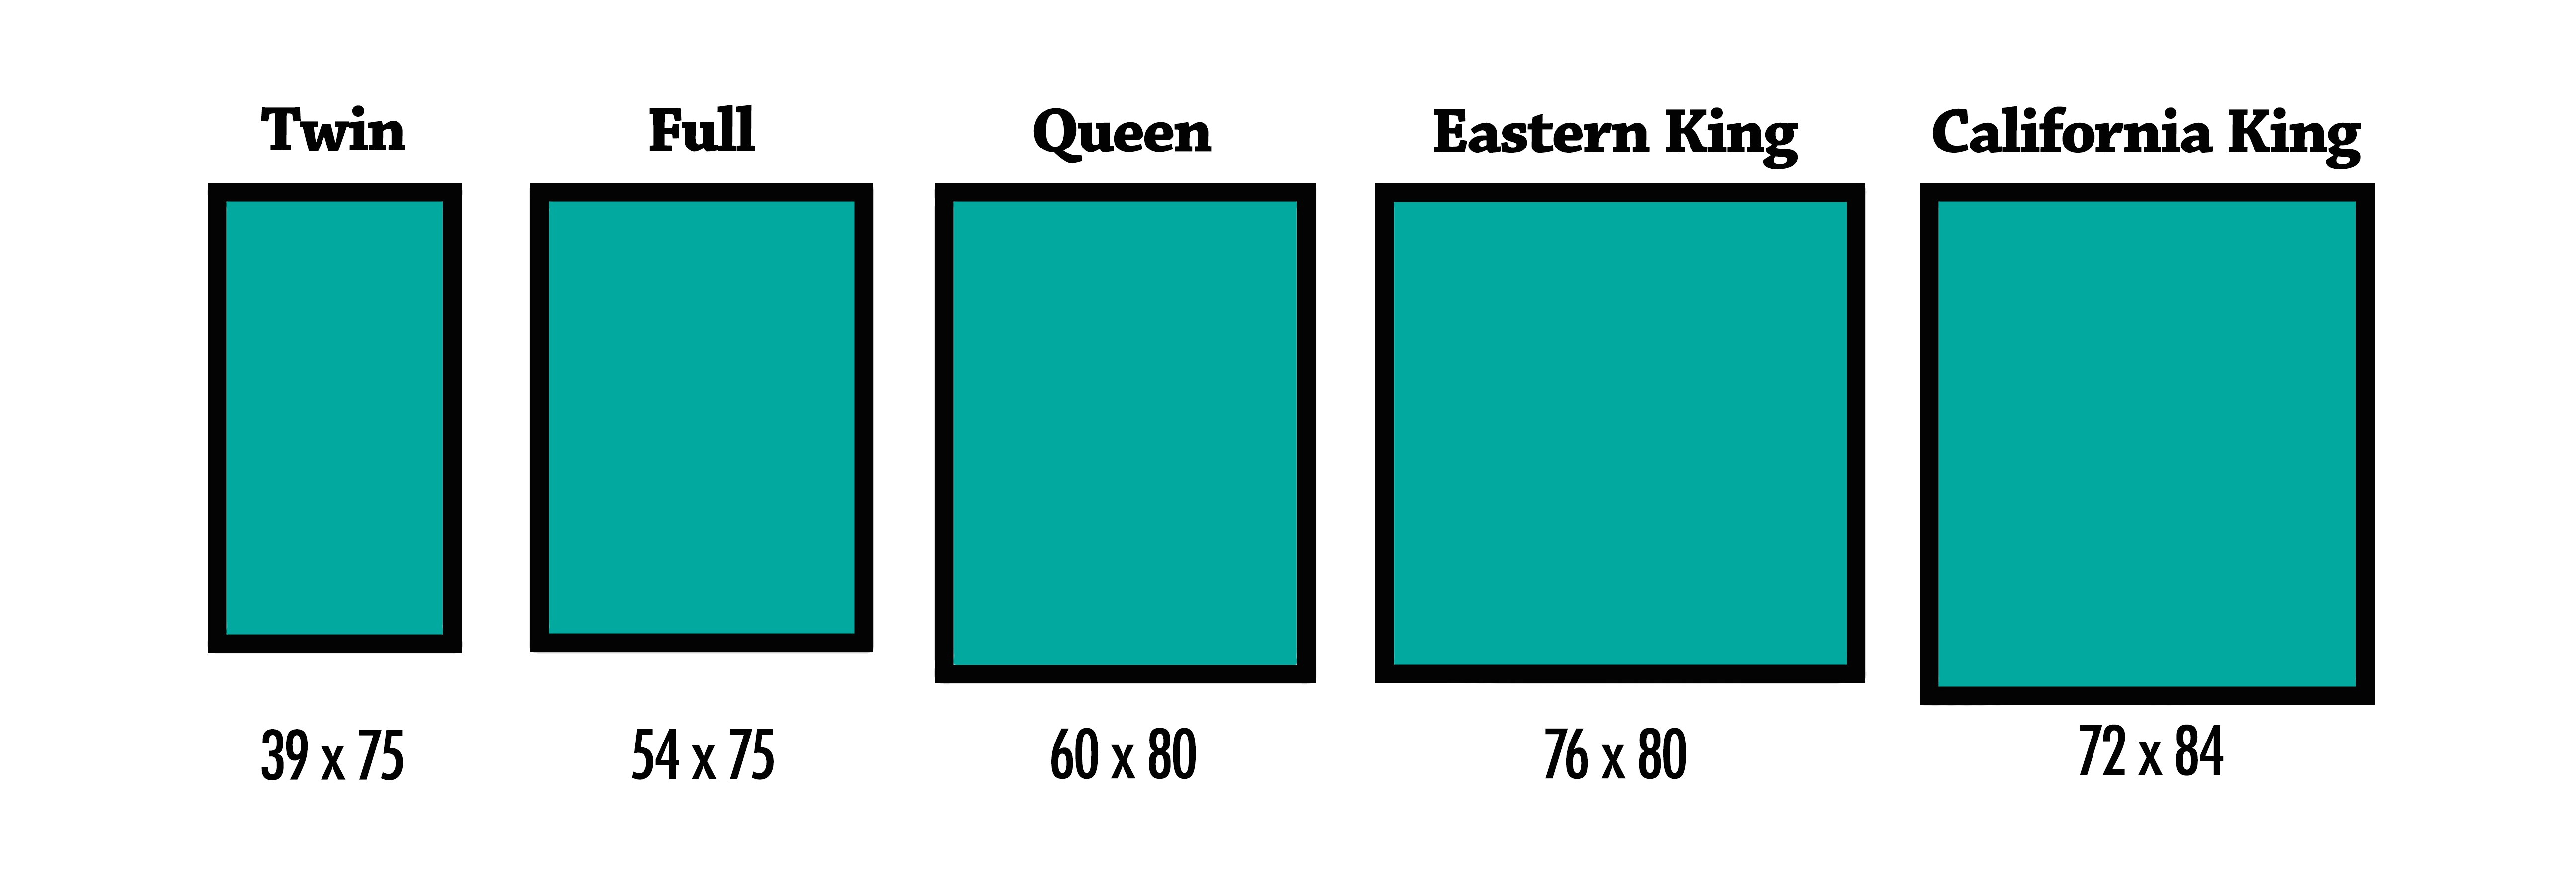 King Vs Queen Size Mattress - Full Bed vs Queen Bed - Difference and ...